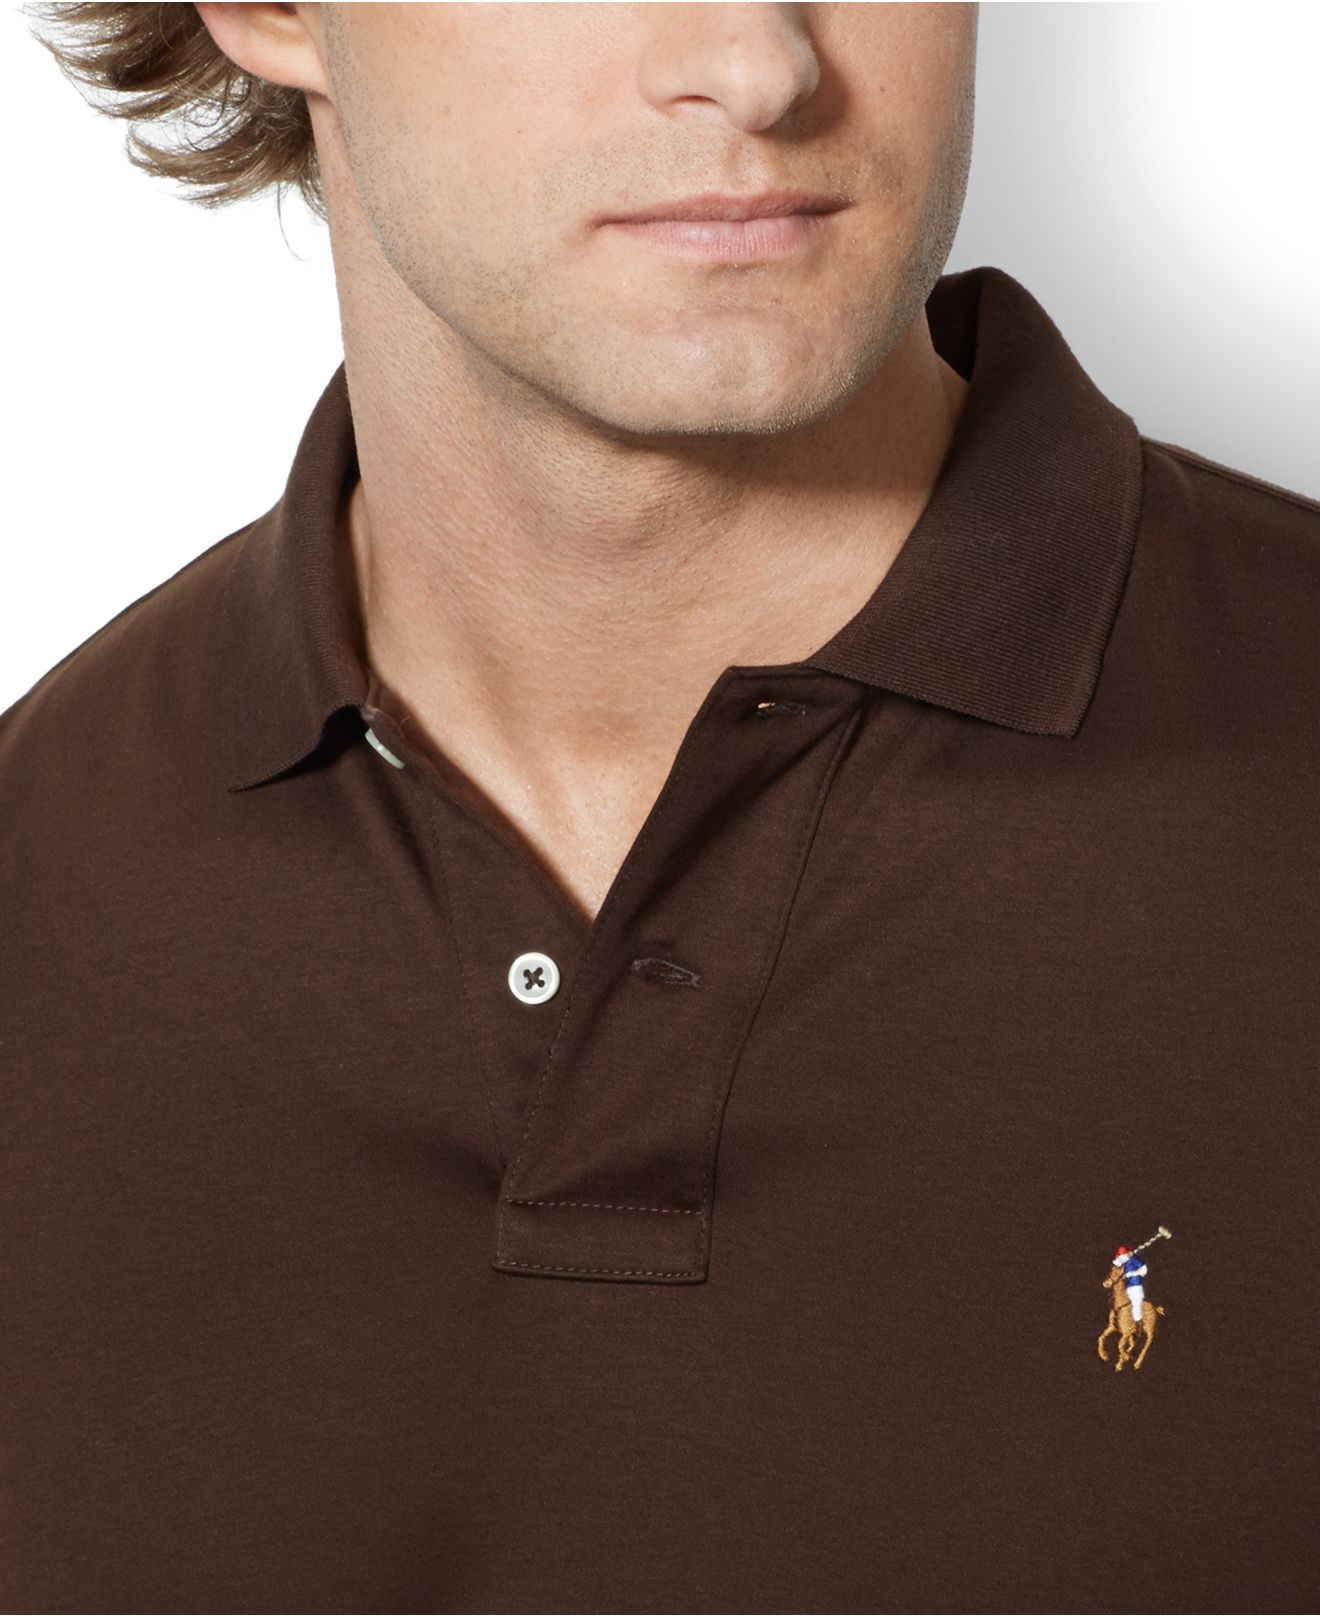 Polo Ralph Lauren Soft-Touch Pima Polo in Brown for Men - Lyst